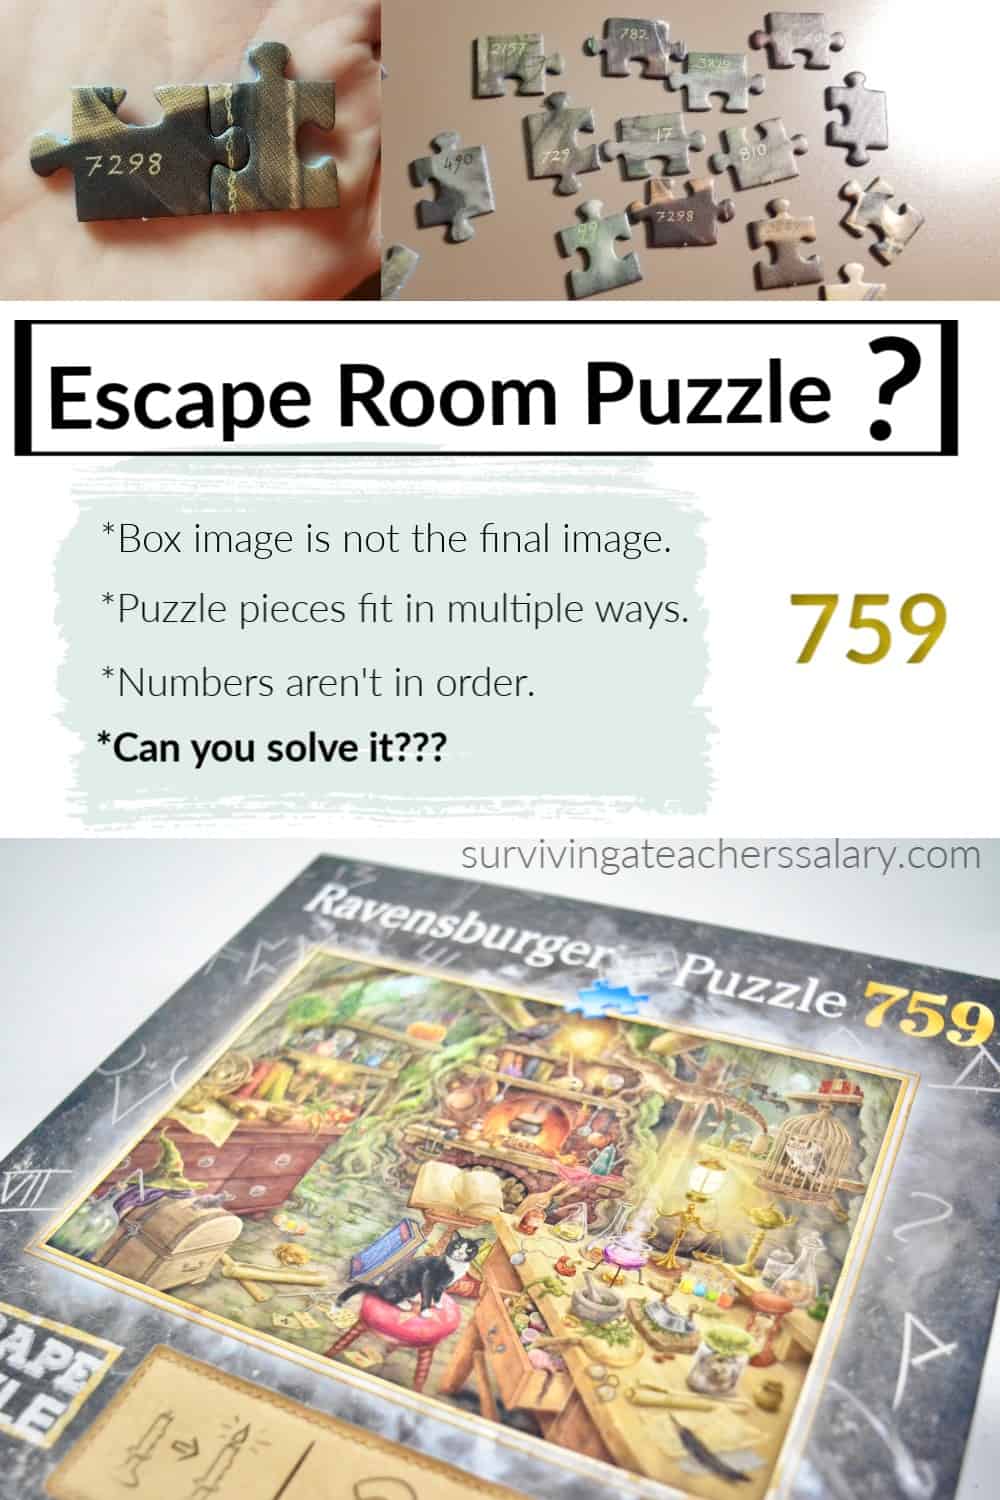 Escape Room + Puzzle in One! Escape Puzzles by Ravensburger